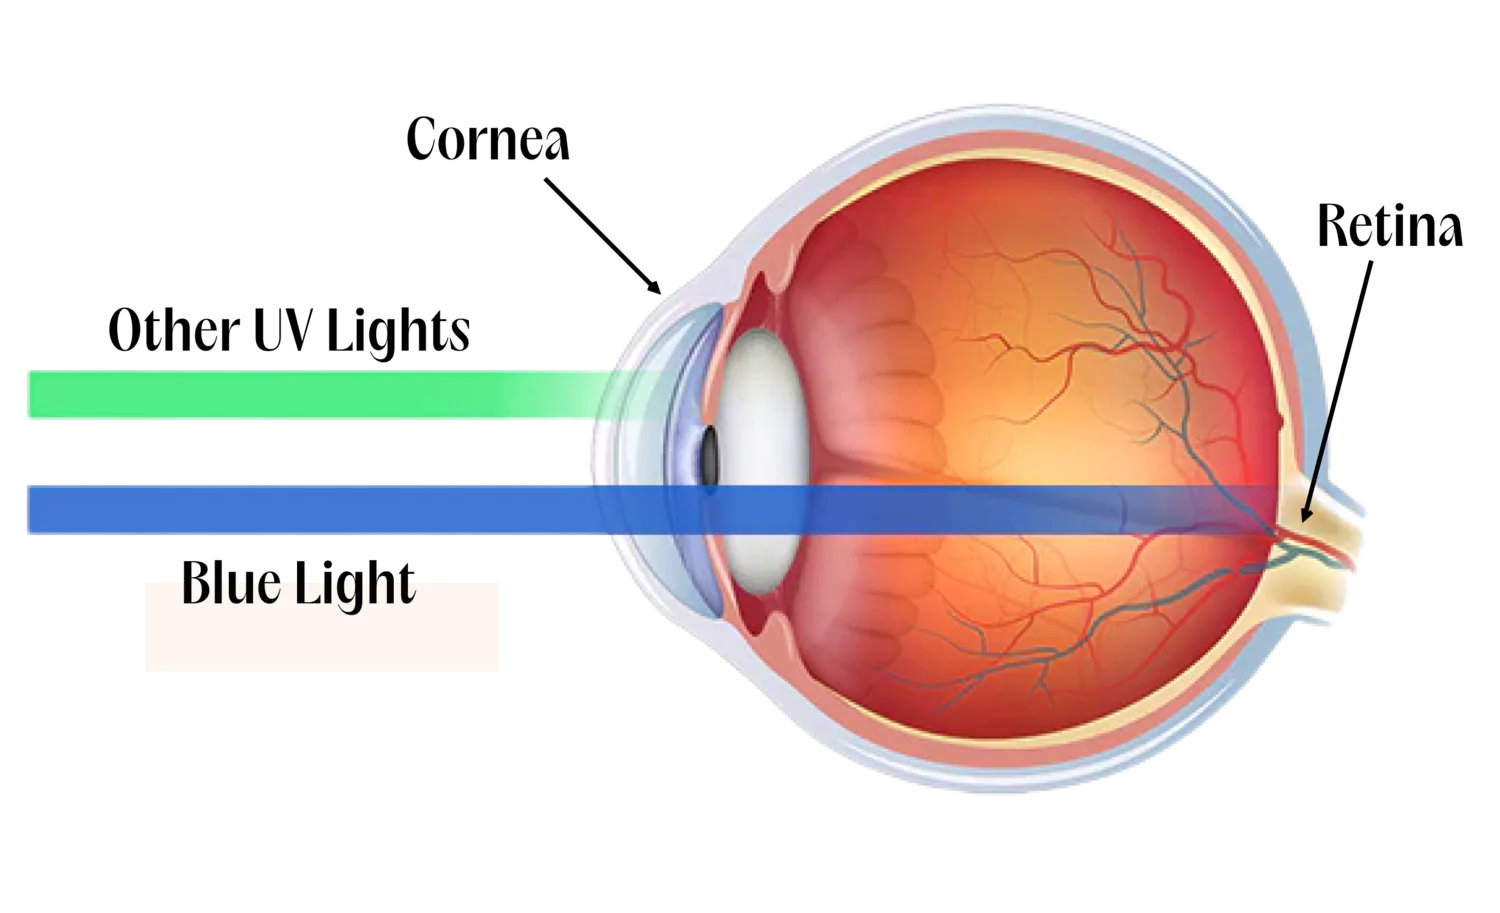 Diagram of human eye anatomy with labeled blue light passing through.